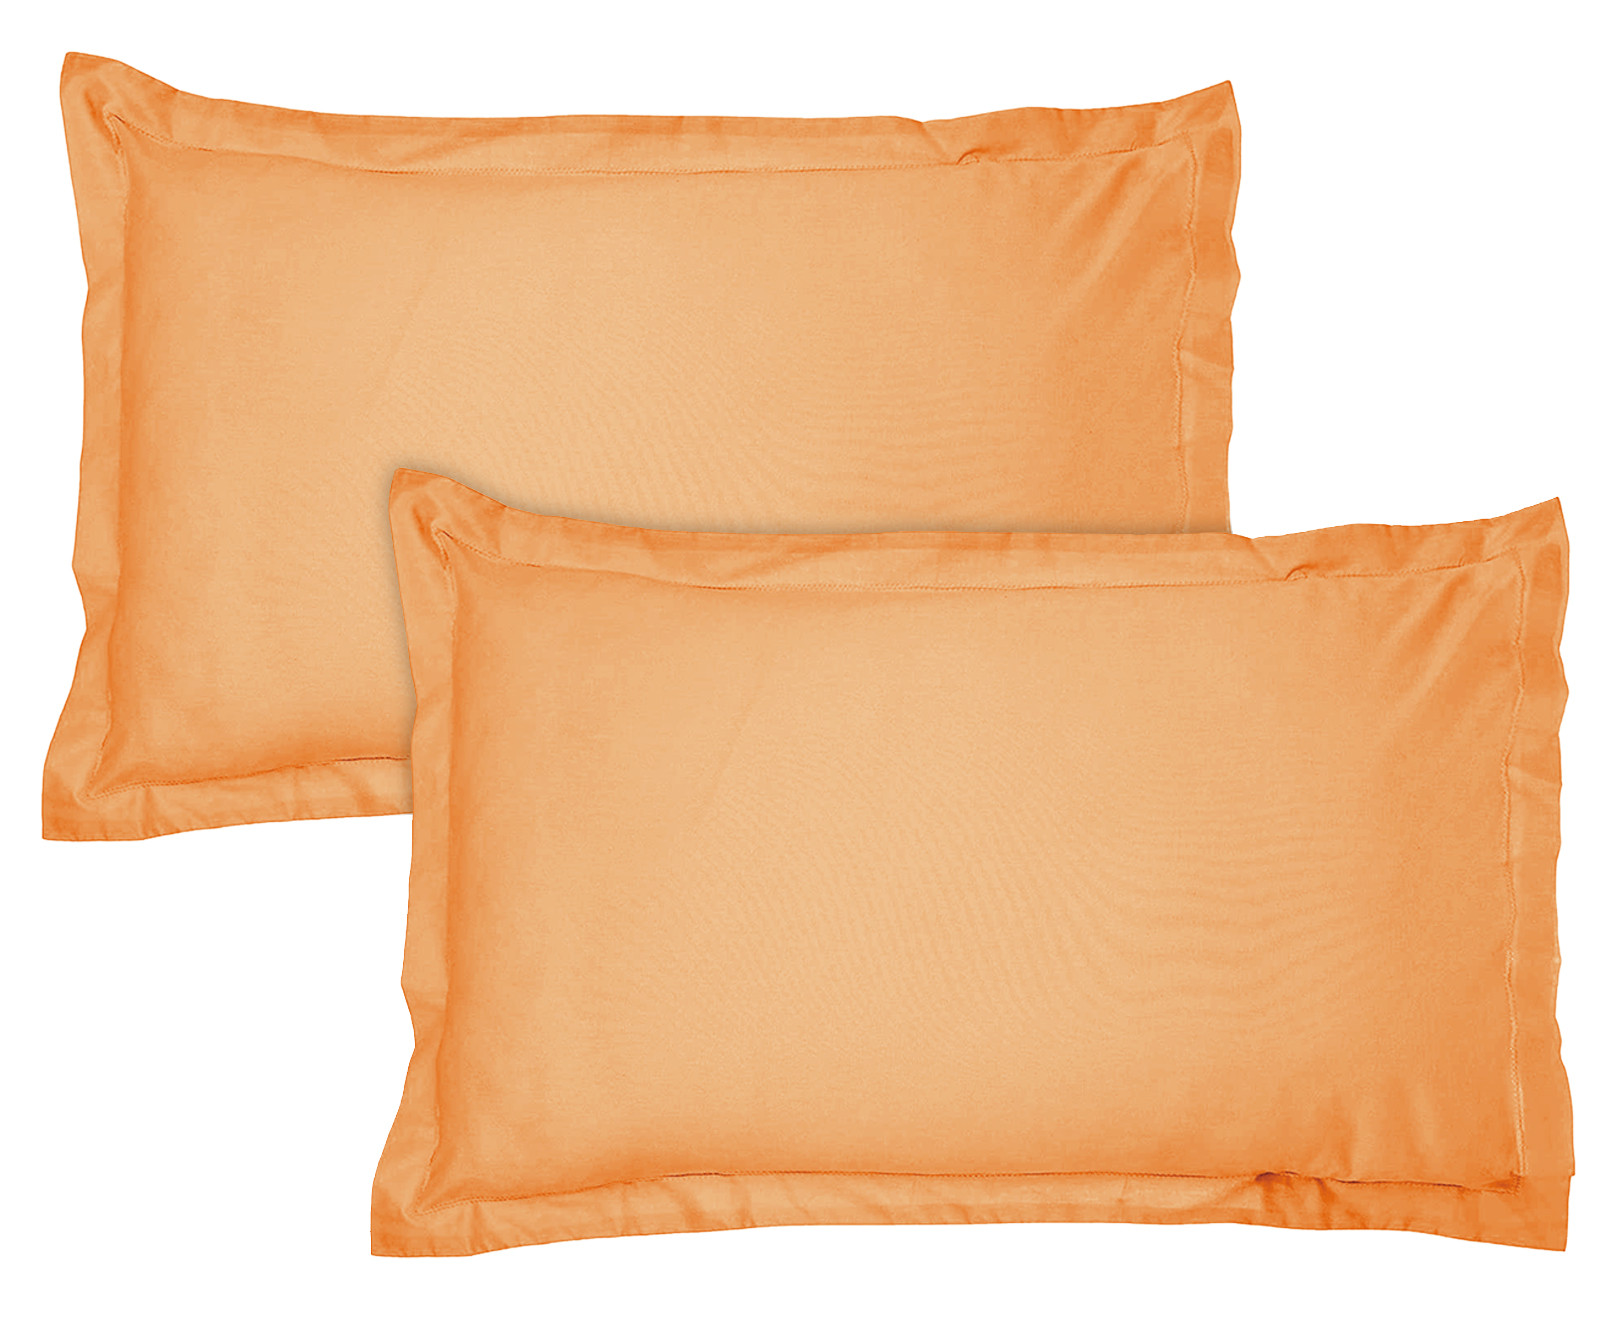 Kuber Industries Breathable & Soft Cotton Pillow Cover For Sofa, Couch, Bed - 29x20 Inch,(Beige)